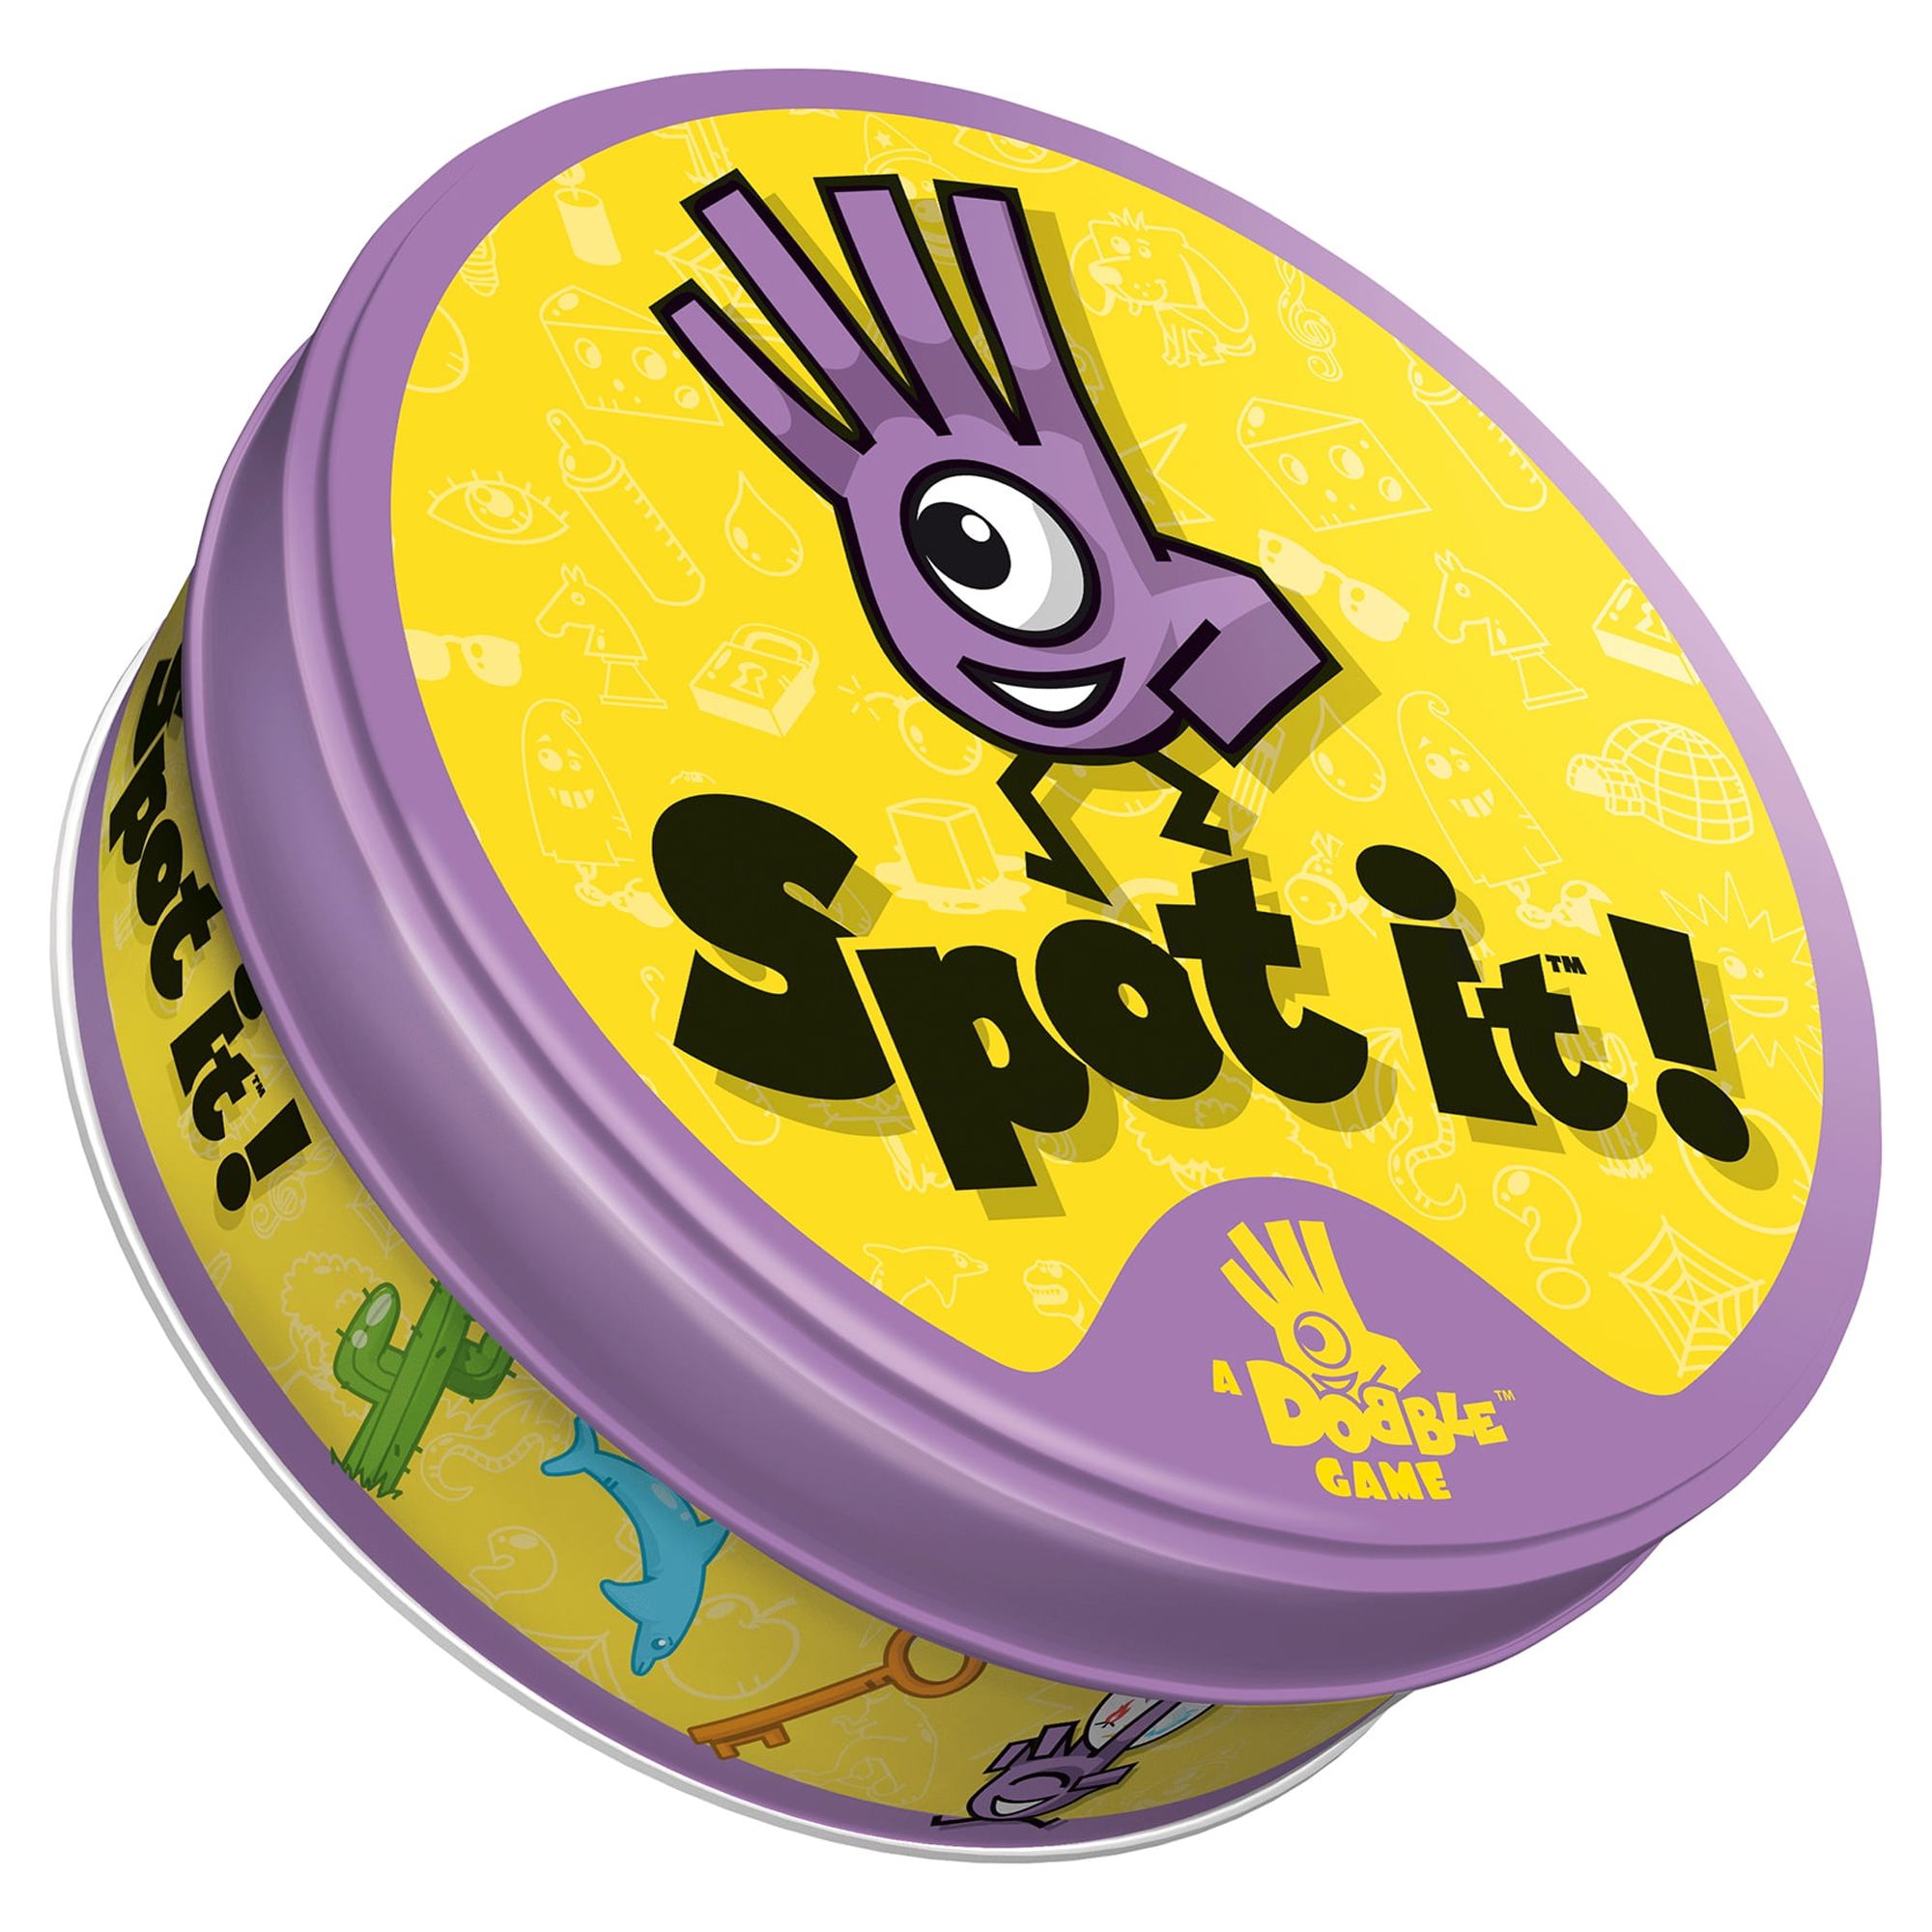 Spot It Family Card Game for Ages 6 and up, from Asmodee - image 2 of 7